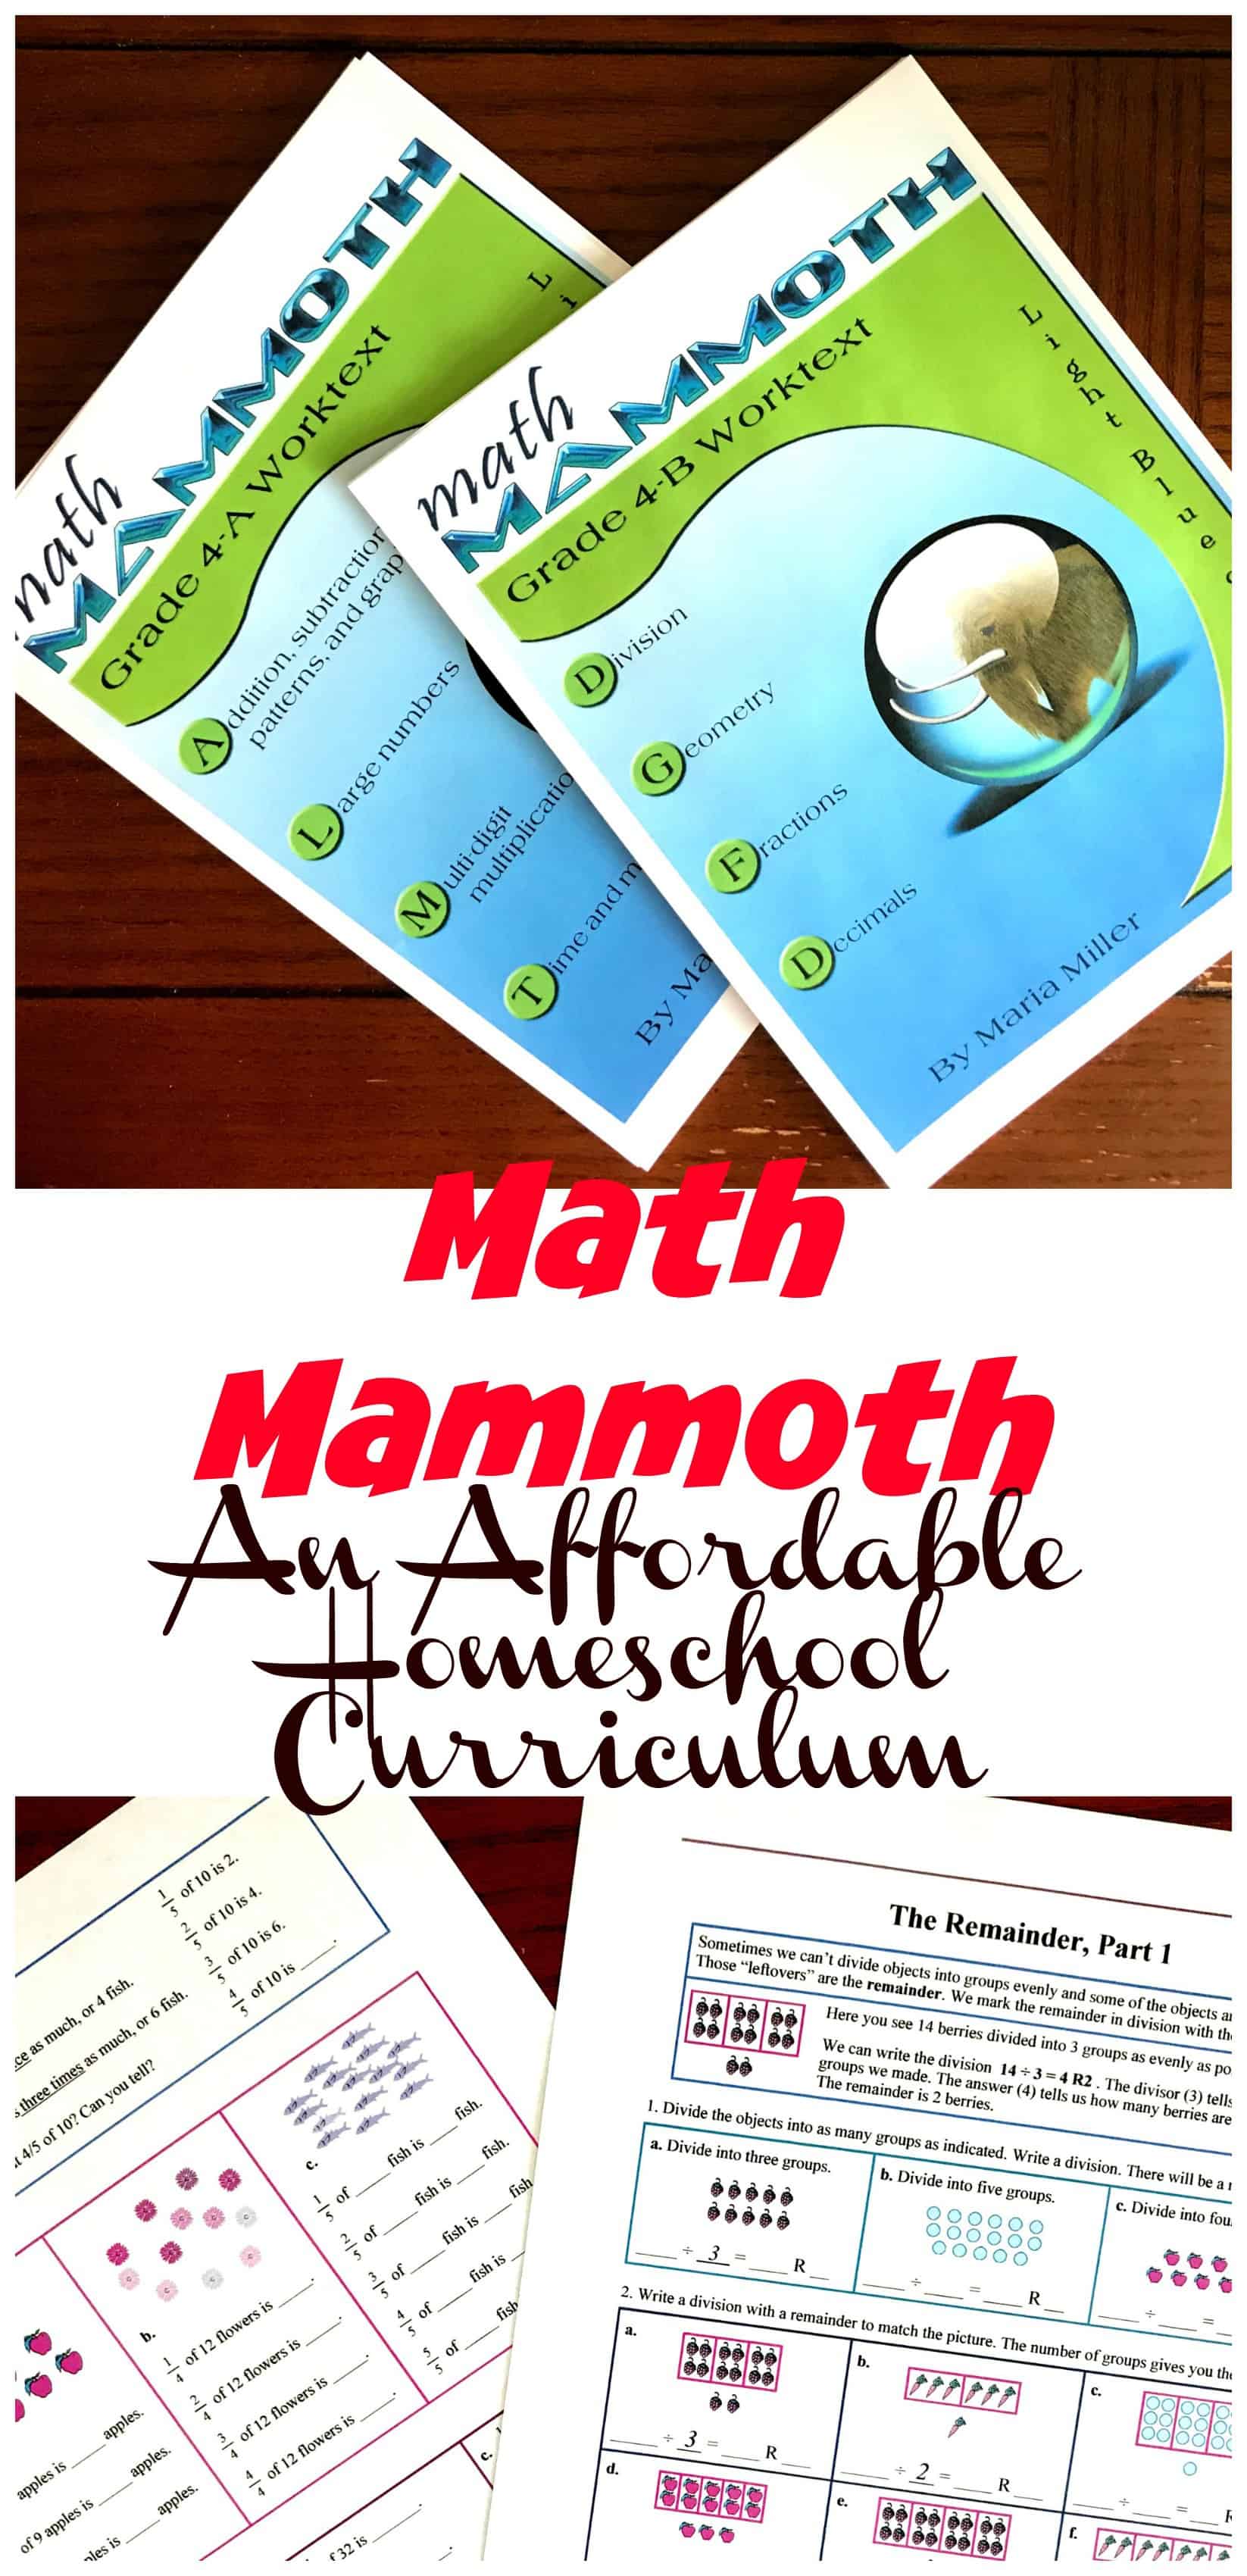 Math Mammoth is an affordable math program that has a wonderful focus on place value. As children work through math problems they learn more about place value through modeling, number lines, and area models.